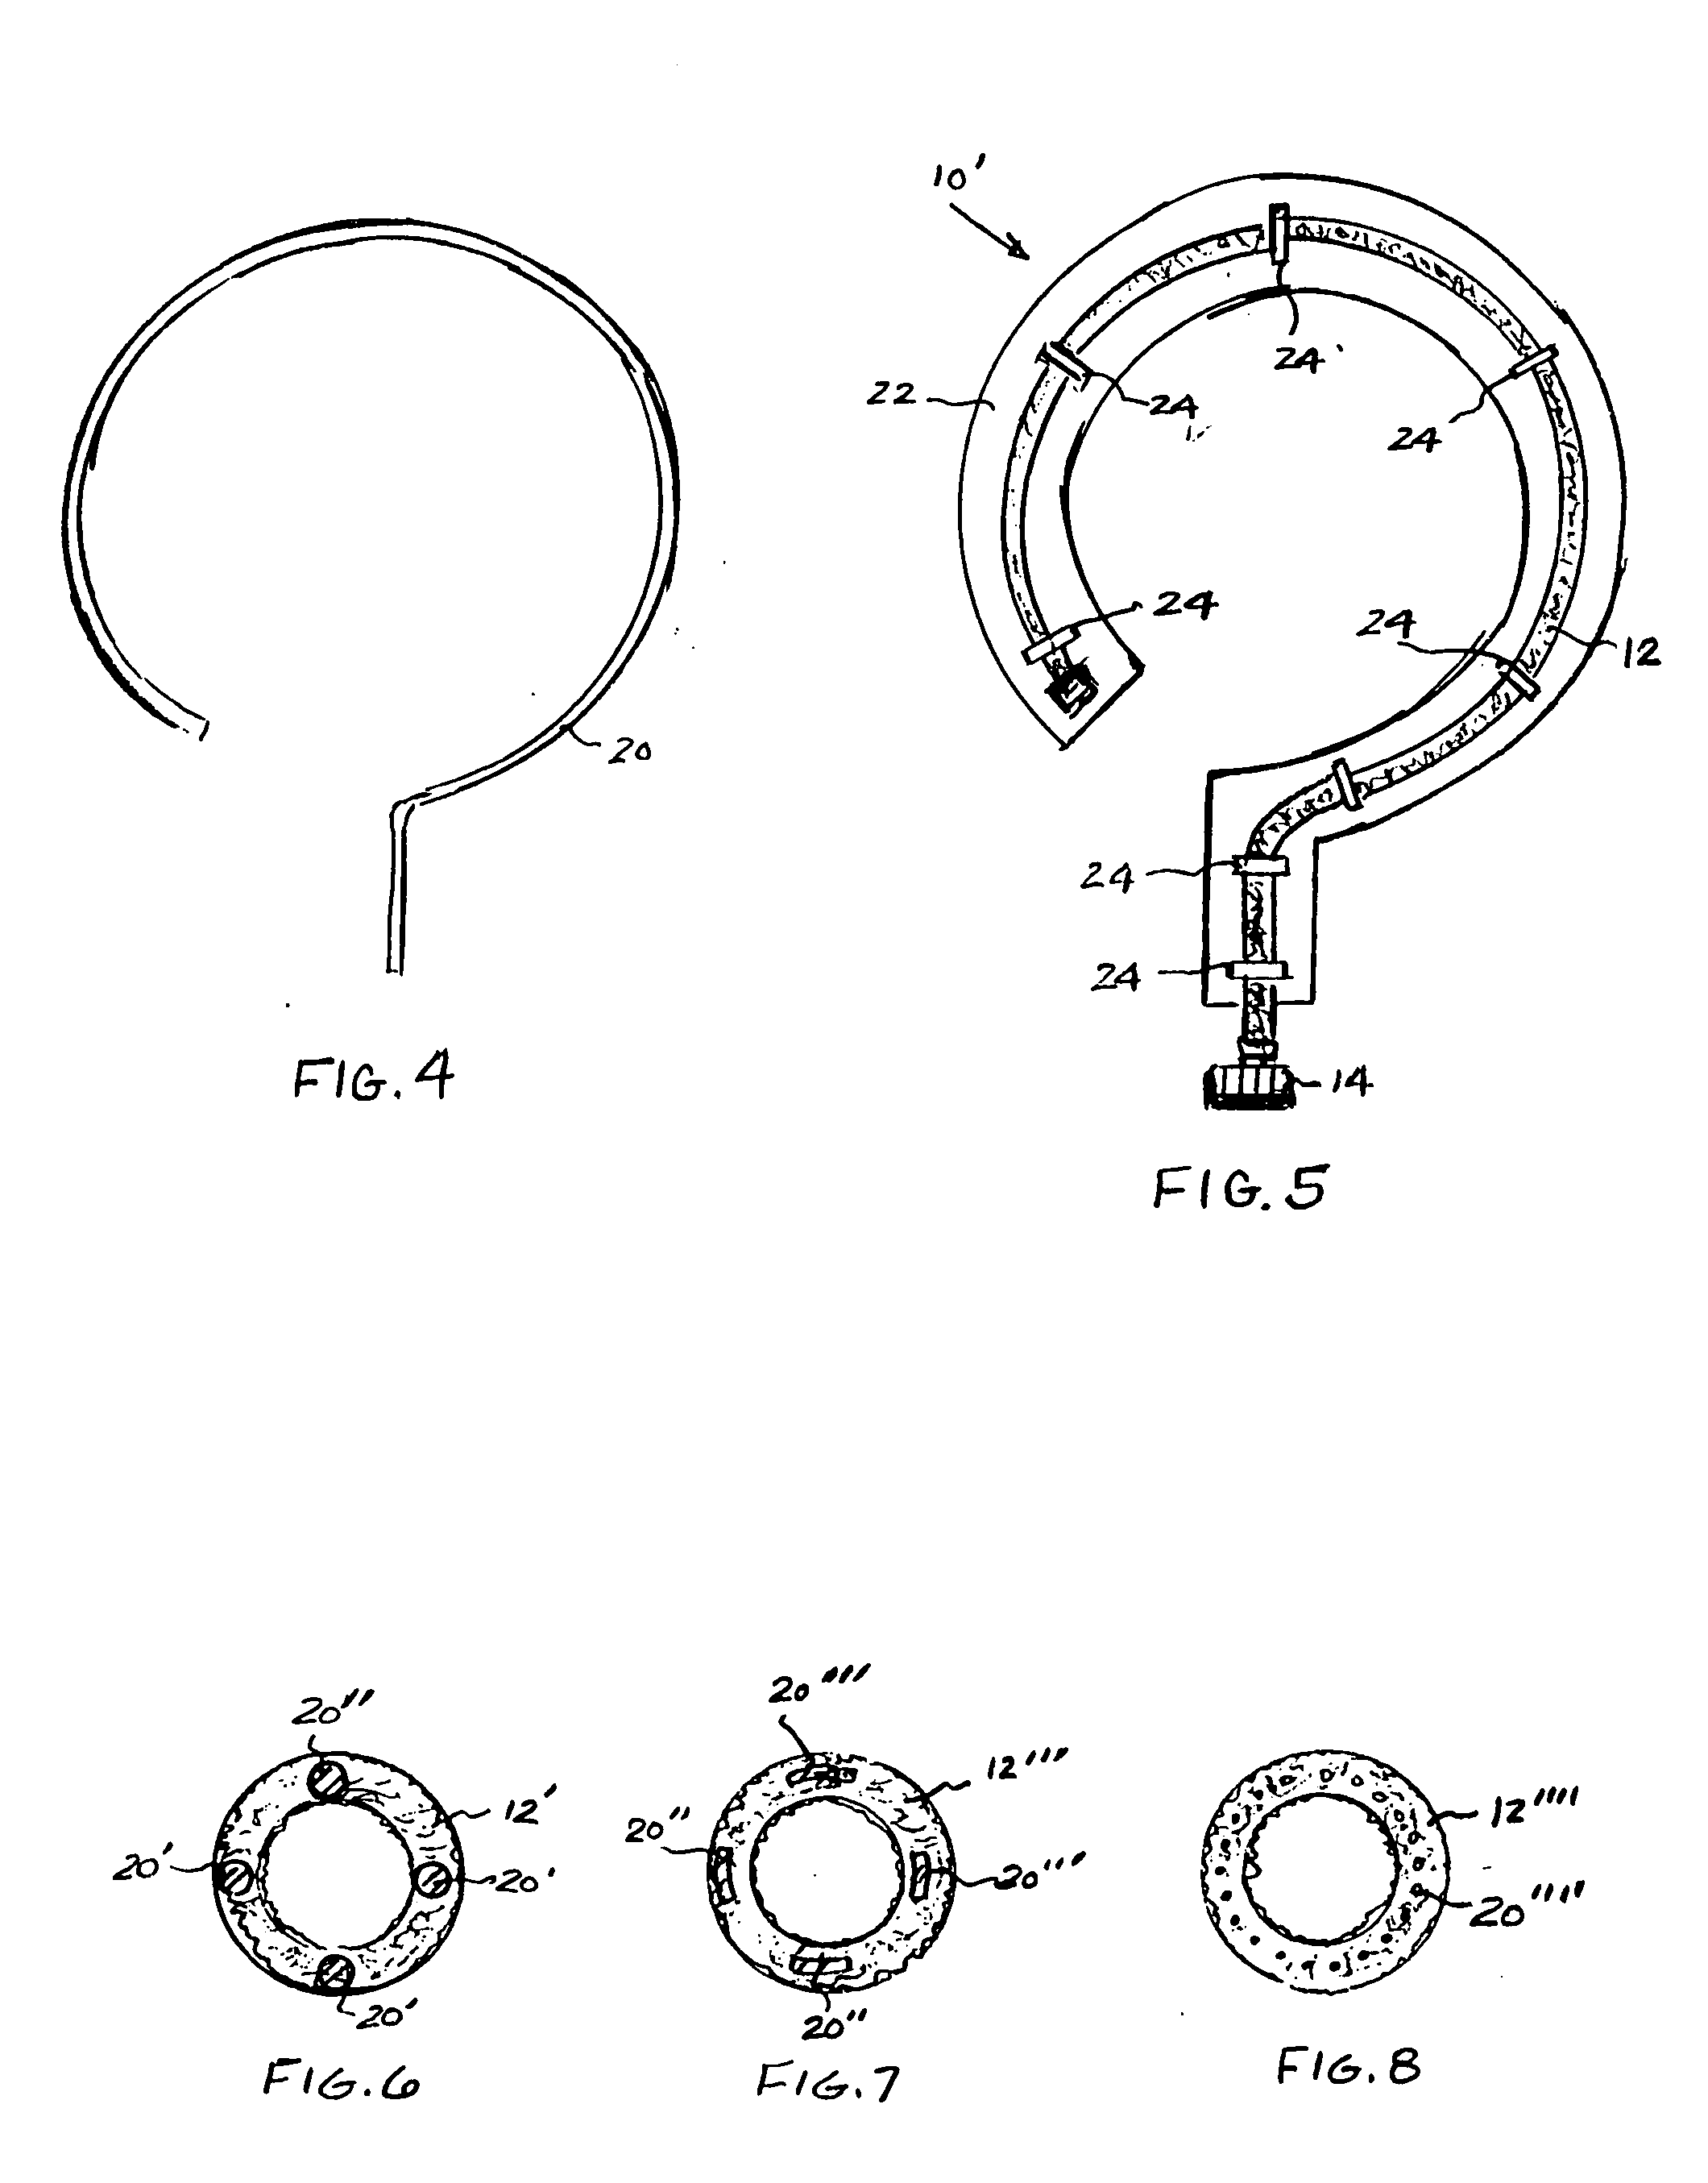 Irrigation device and system